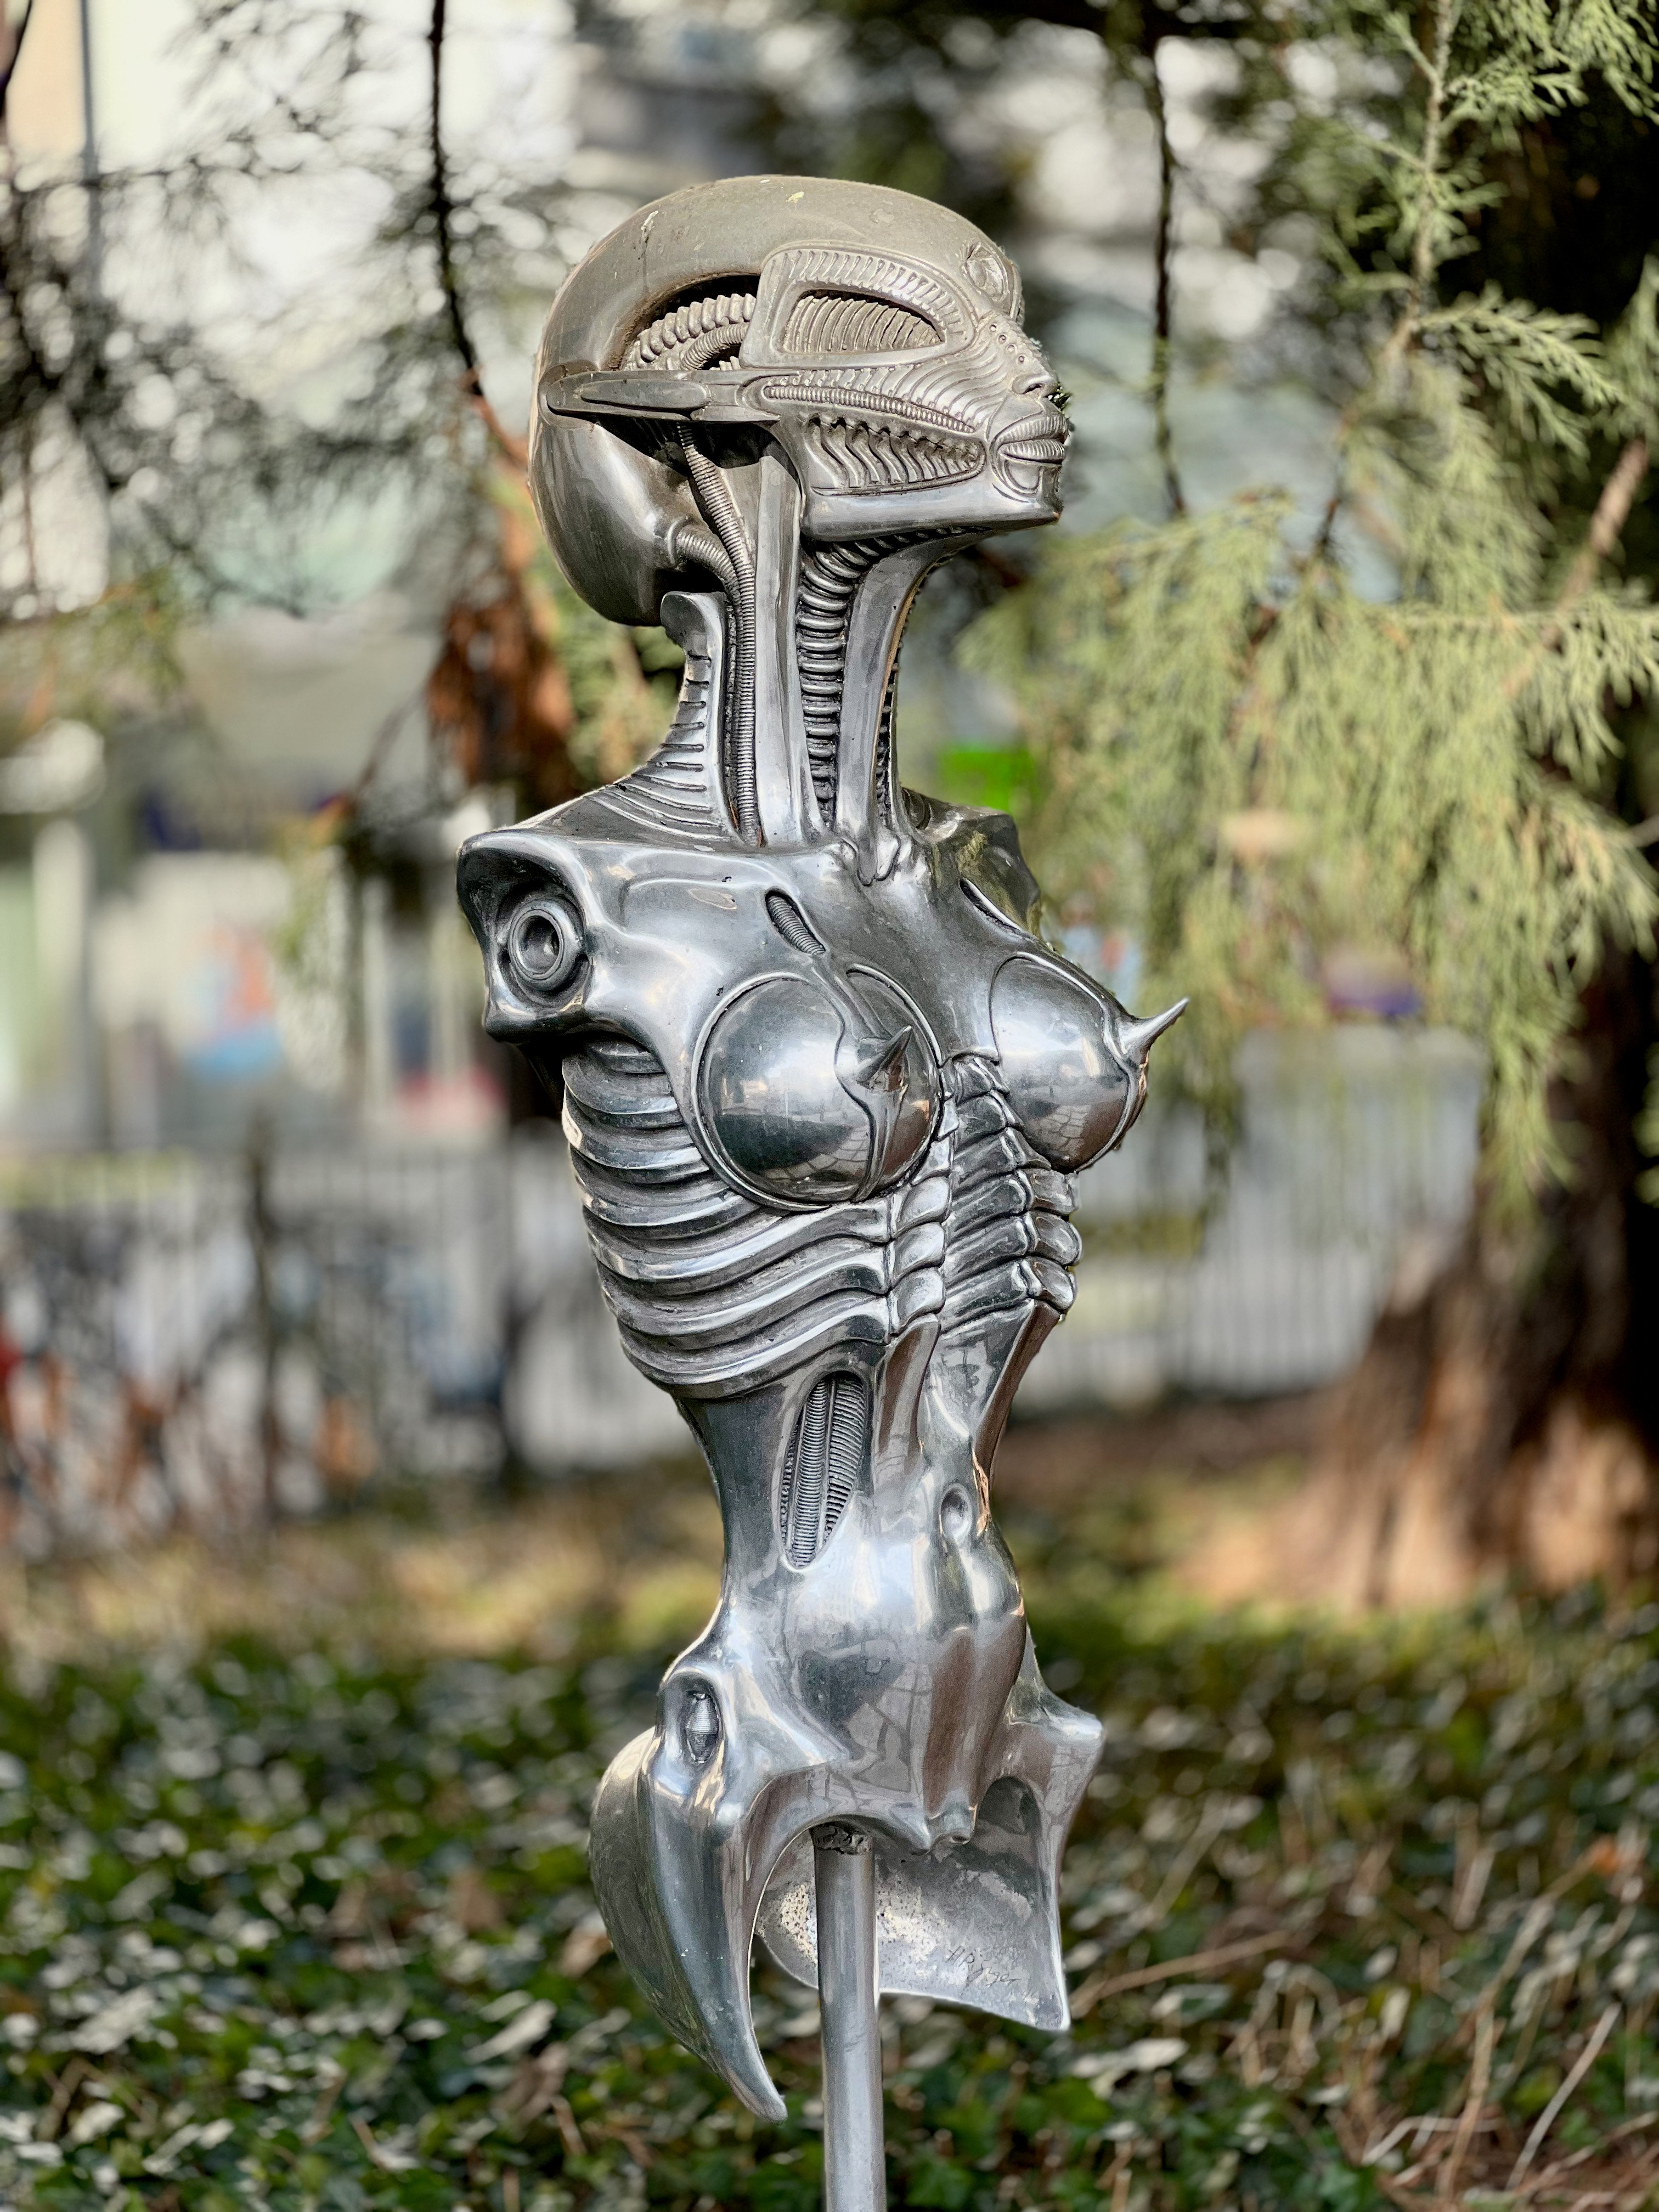 H R Giger’s “Torso with long skull shape” stands in the grounds of the Bündner Kunstmuseum in the Swiss city of Chur, the artist’s otherwise conservative birthplace. Photo: Peter Neville-Hadley